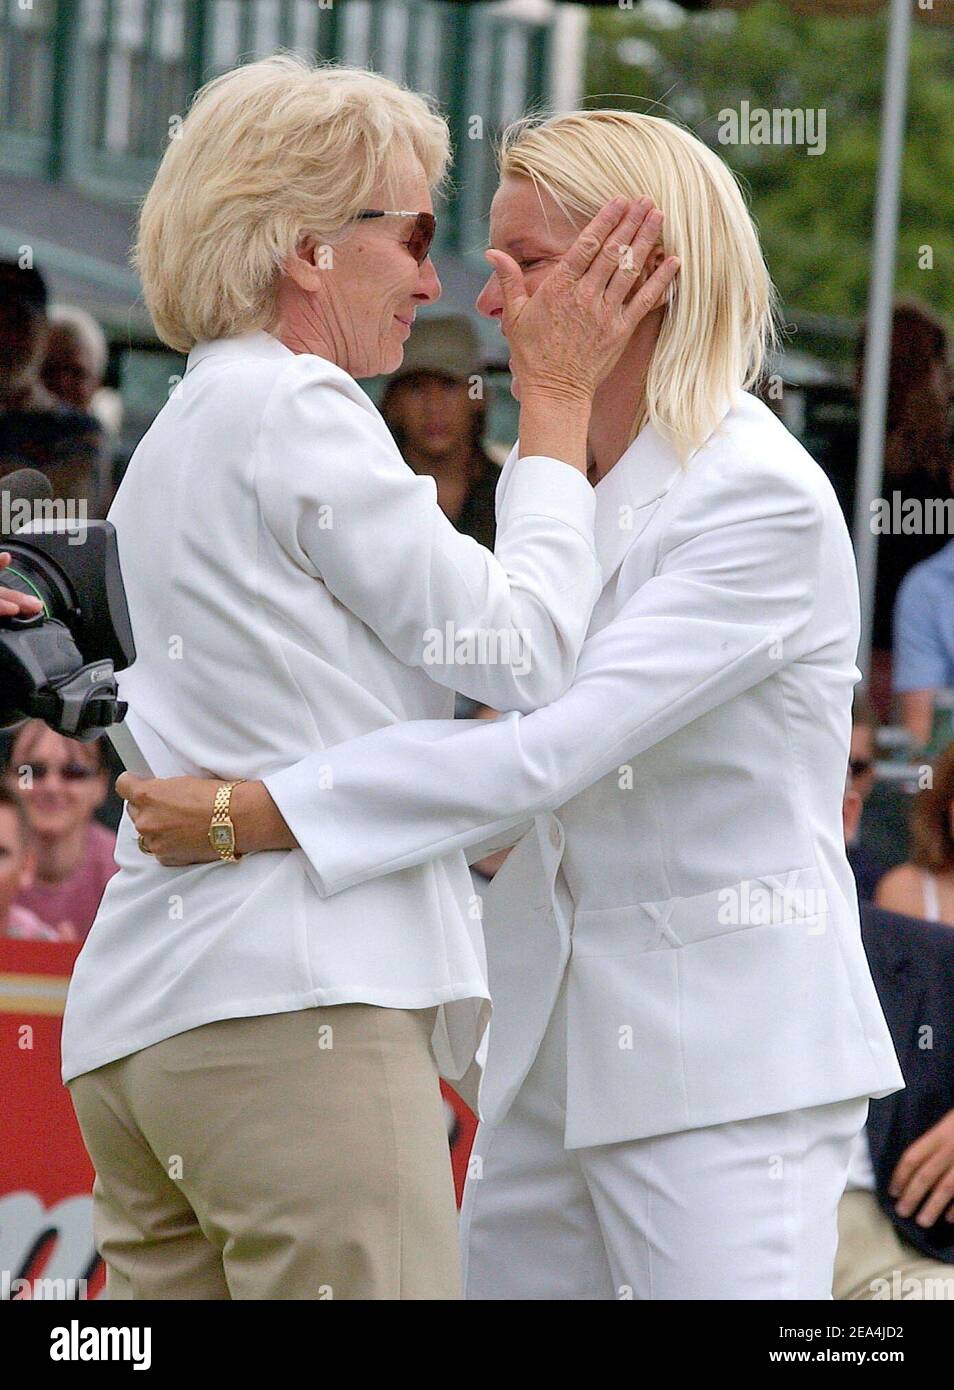 Czech tennis player Jana Novotna, in tears, hugs her mother after she  delivered her acceptance speech at the 2005 Tennis Hall of Fame Induction  Ceremony held in Newport, Rhode Island, on Saturday